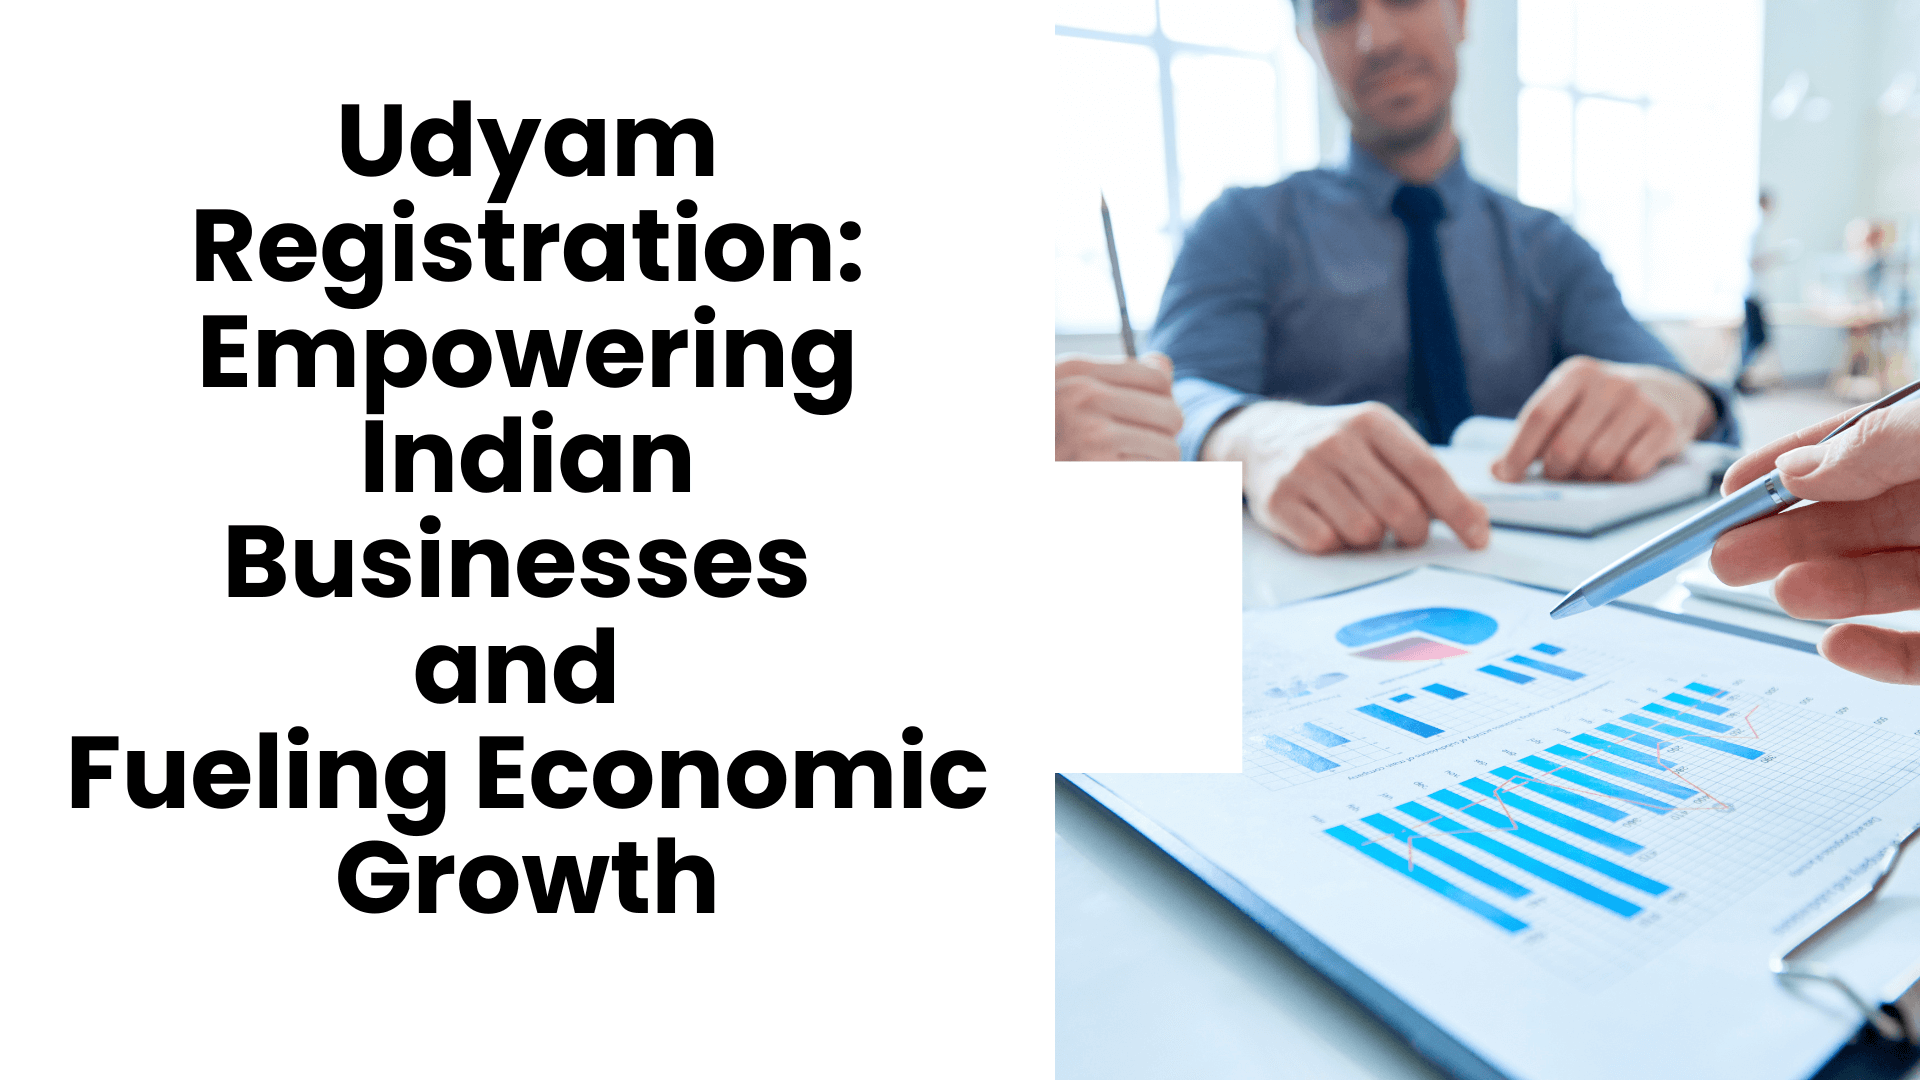 Udyam Registration Empowering Indian Businesses and Fueling Economic Growth